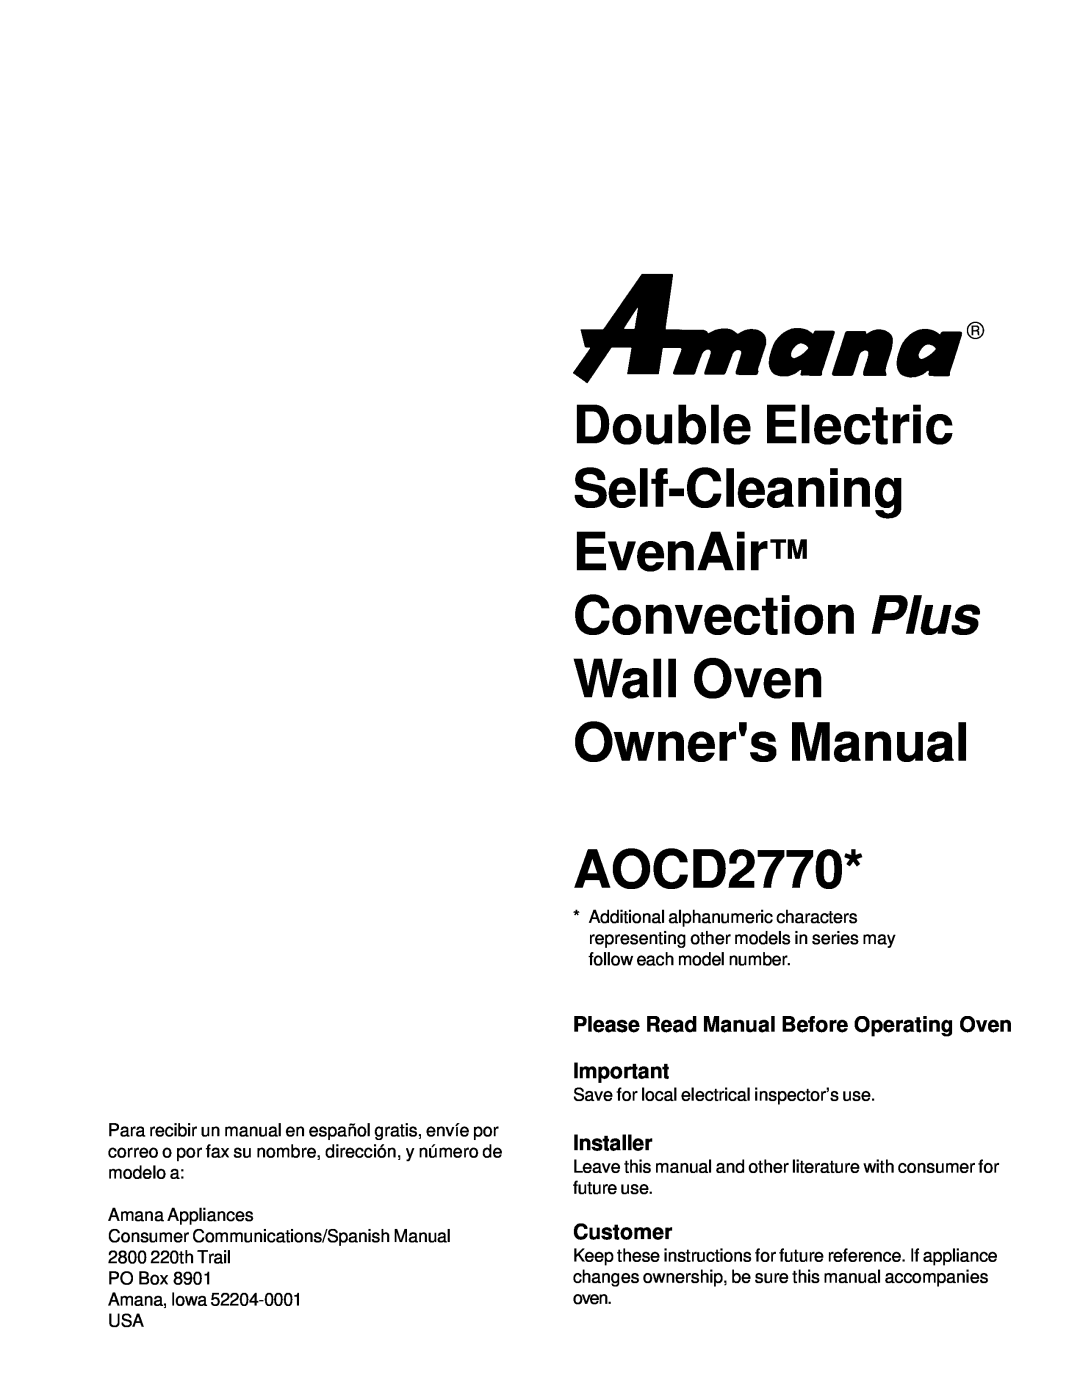 Amana AOCD2770 owner manual Please Read Manual Before Operating Oven, Installer, Customer 